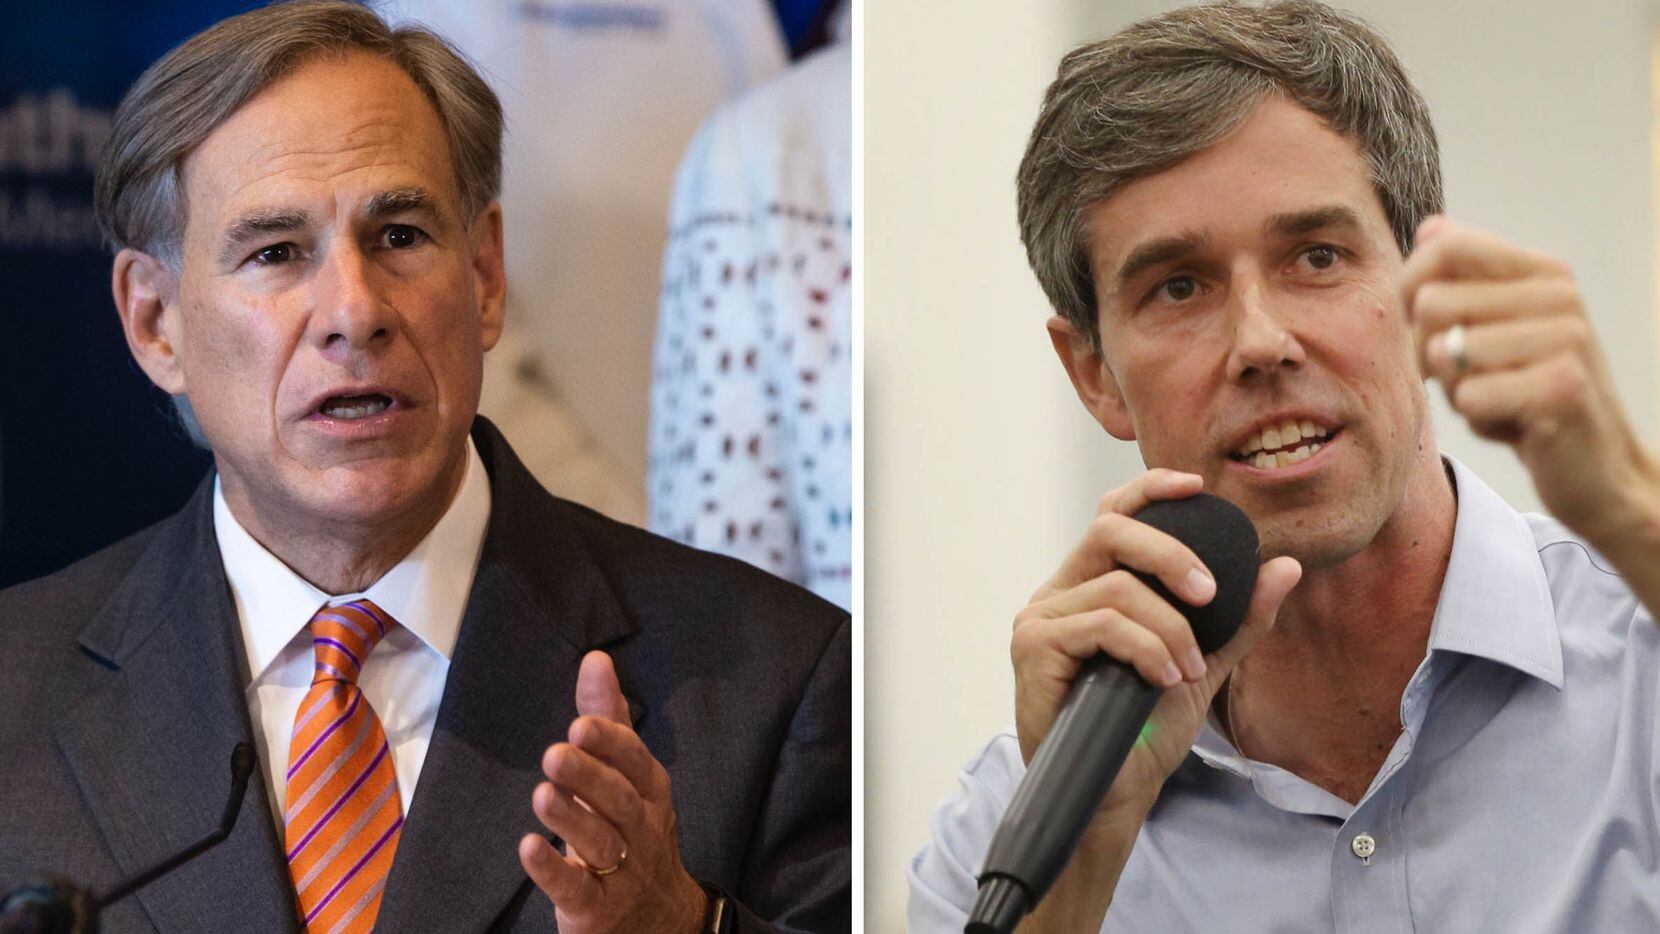 Democratic mega donor George Soros and an Austin-area couple each gave $1 million to Beto...